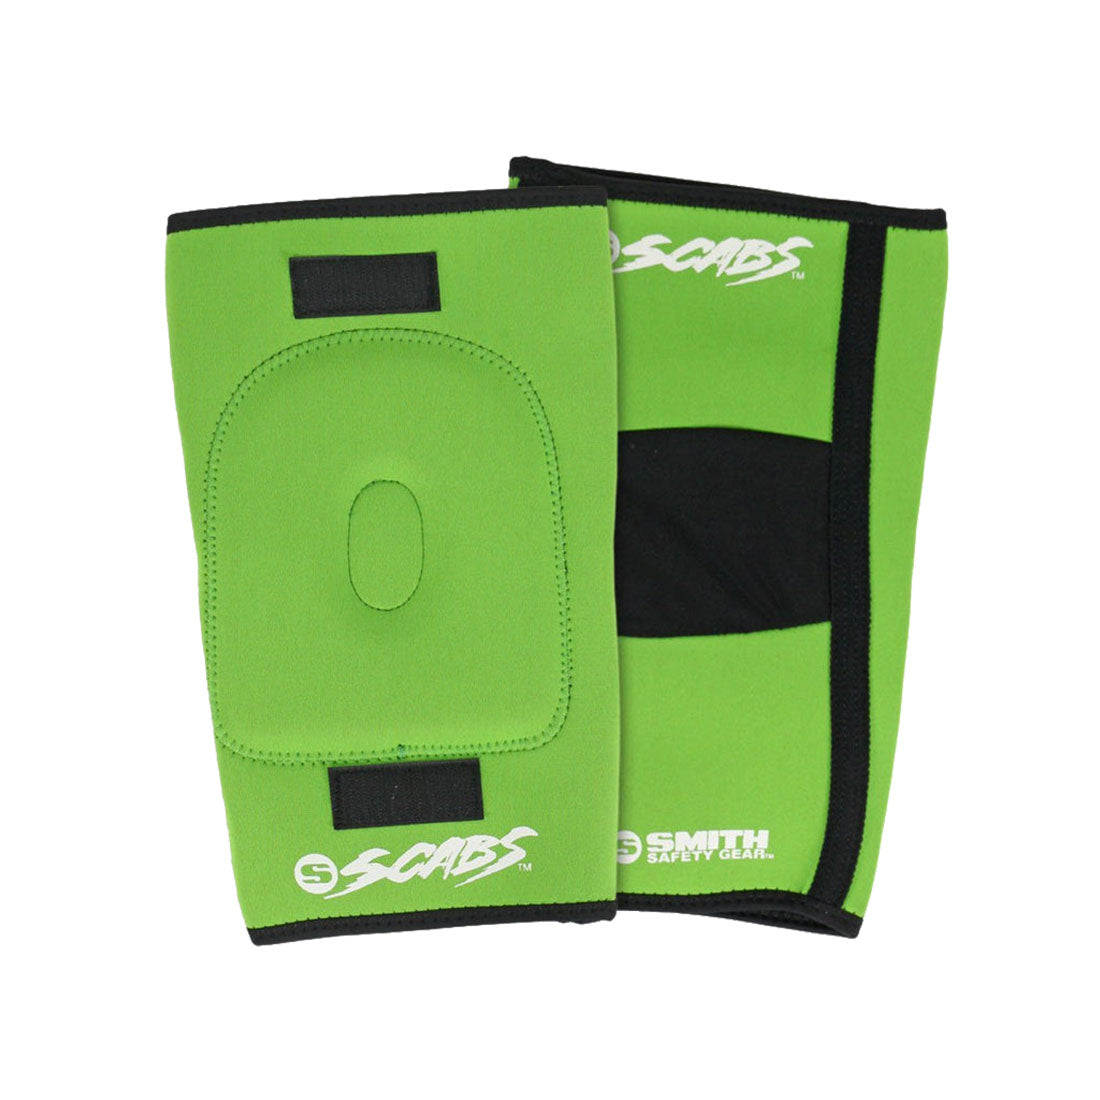 Smith Scabs Knee Gasket - Coloured Green Protective Gear